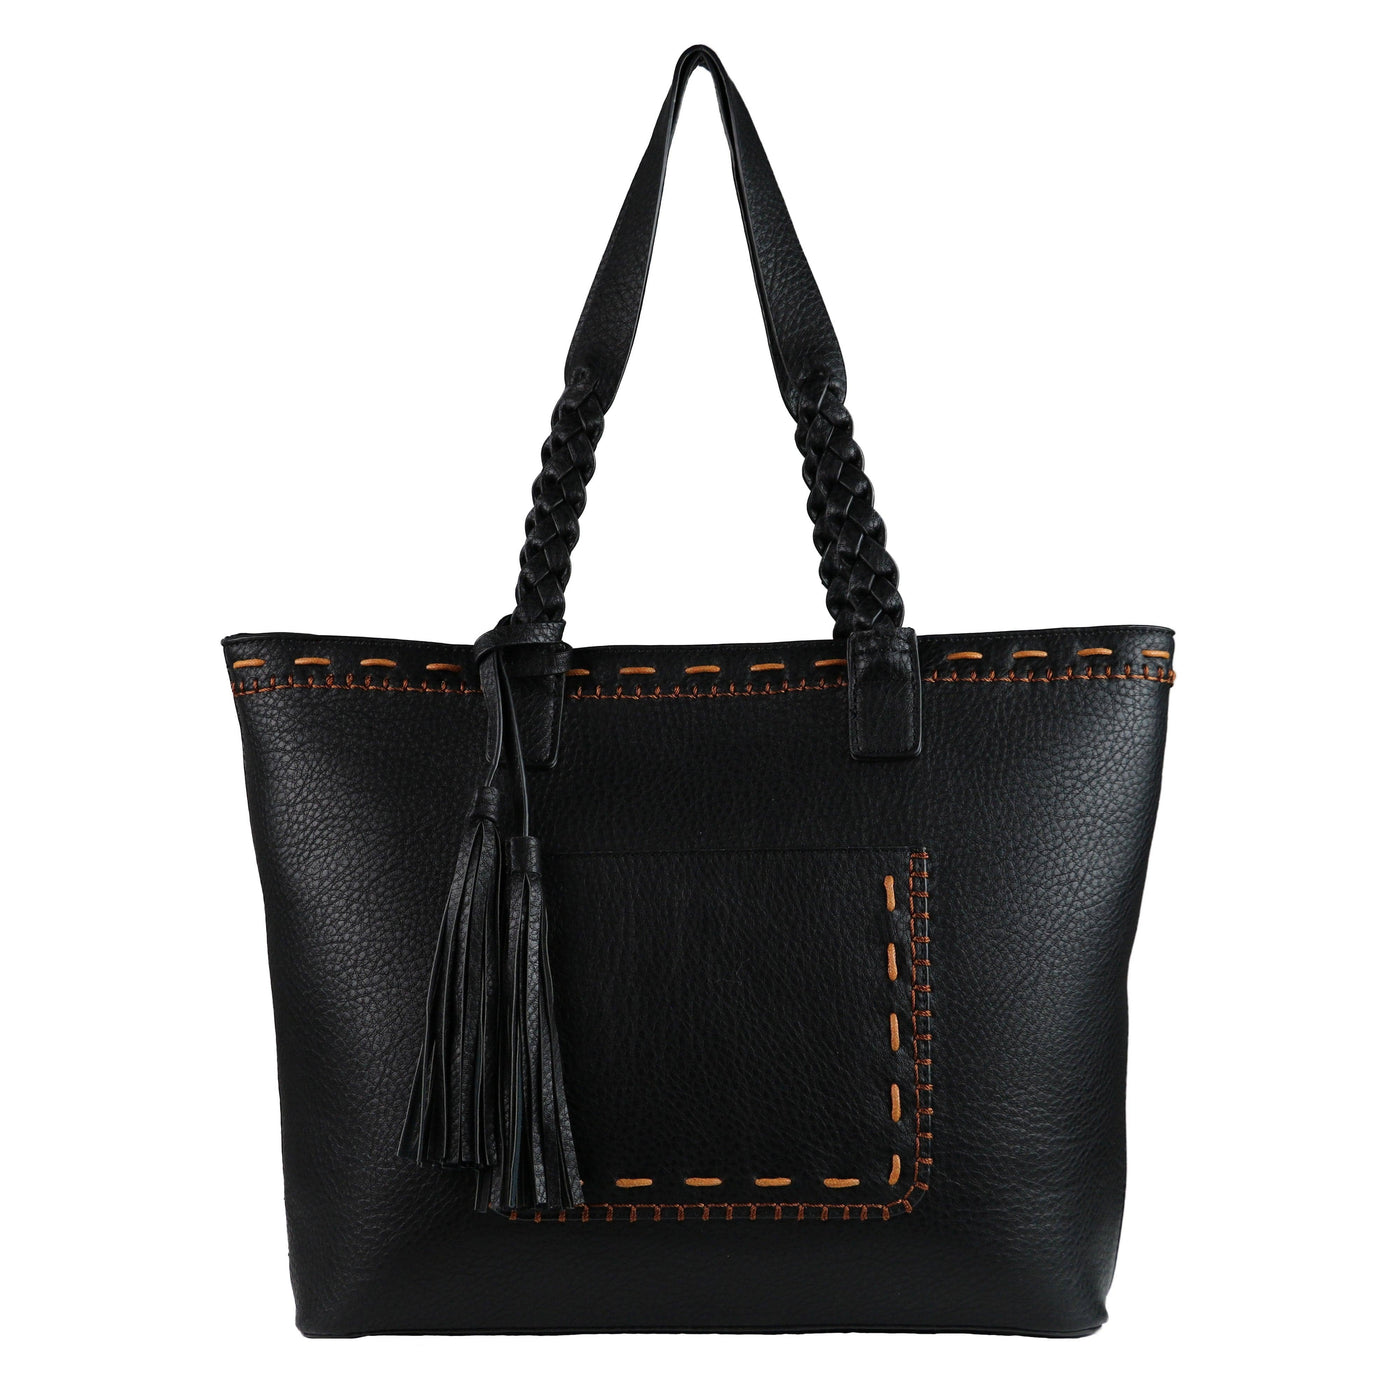 Concealed Carry Cora Tote by Lady Conceal -  Locking Designer Conceal Carry Handbag for women -   Locking Conceal and Carry Handbag with Universal Holster for Handguns -  Unique Handbag Gun and Pistol Bag - crossbody Handbag for concealed gun carry - concealed carry Handbag gun purse with locking zipper